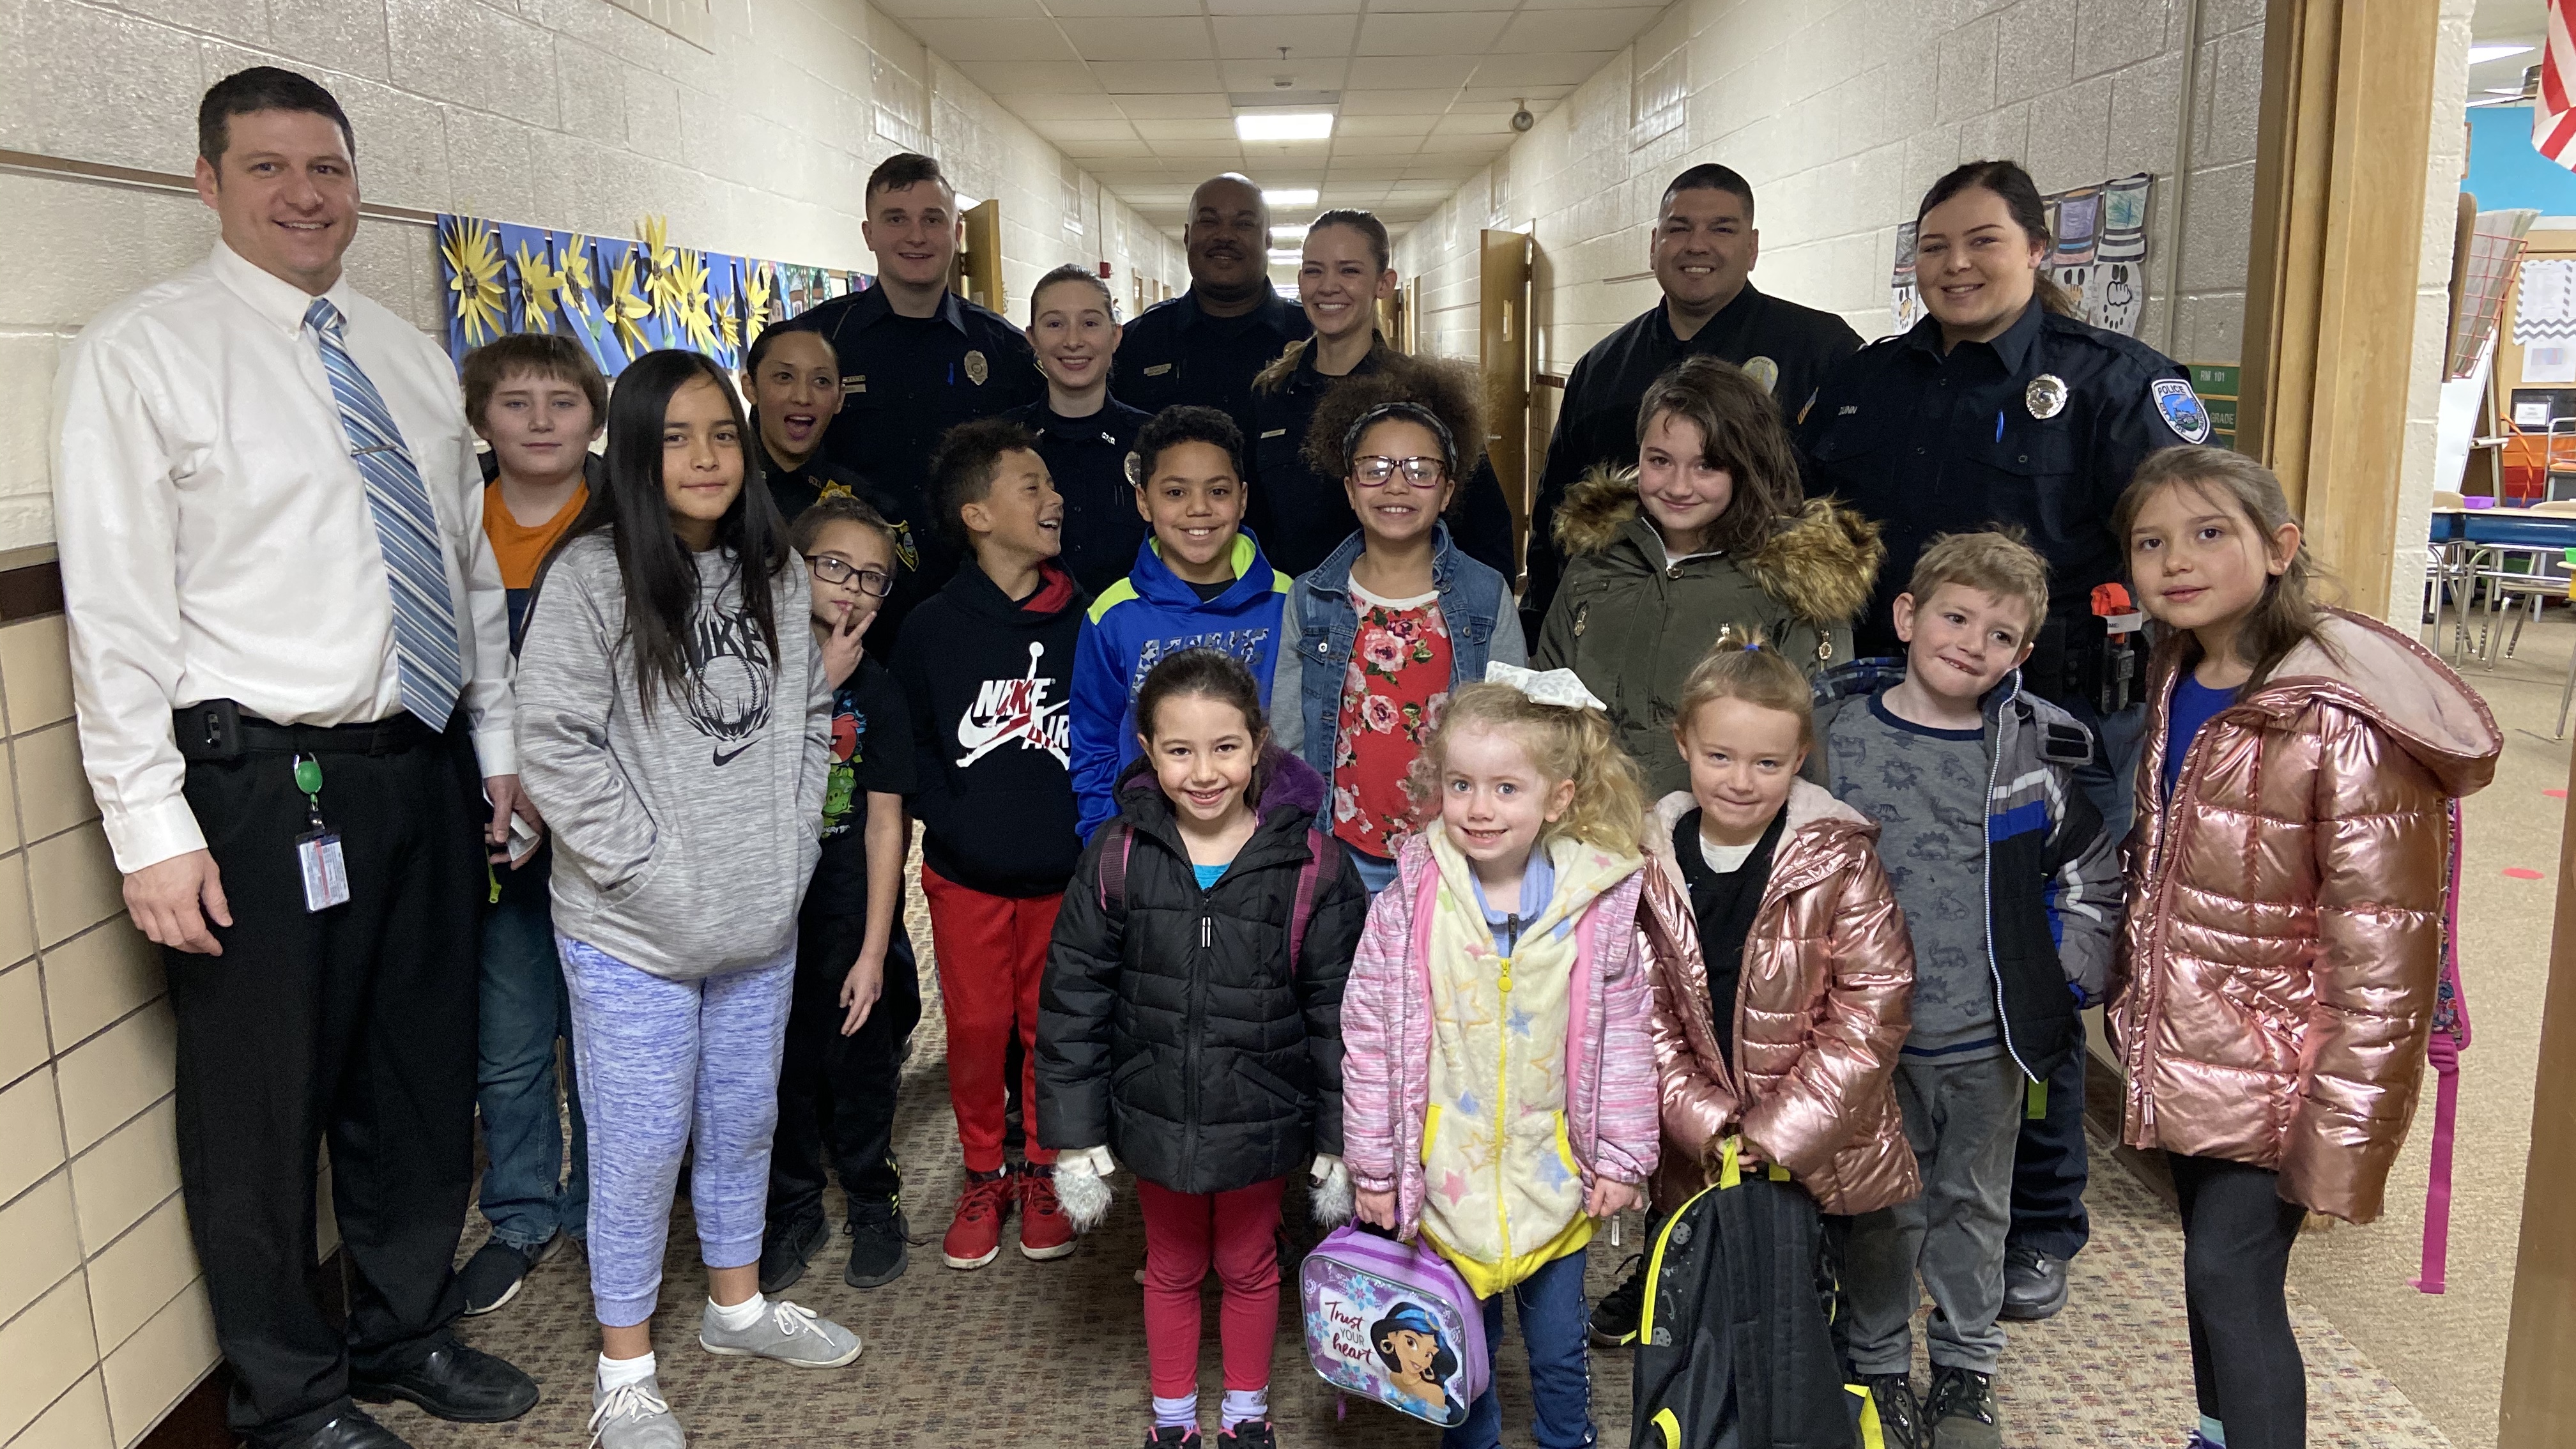 262nd basic training class donated money collected by the class to Morgan Elementary School